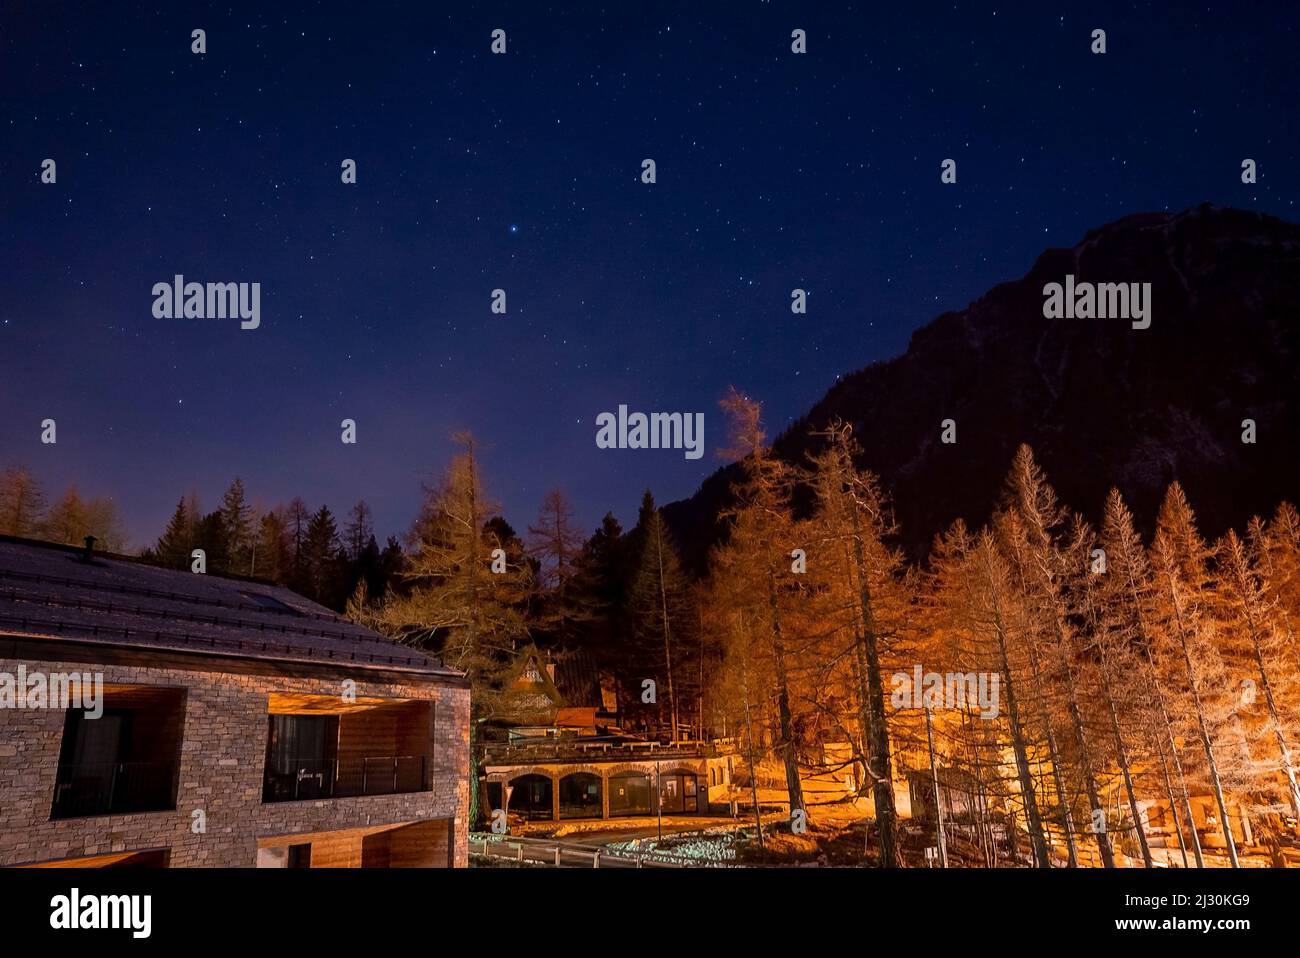 View of illuminated ski resort by pine trees and mountain during starry night Stock Photo